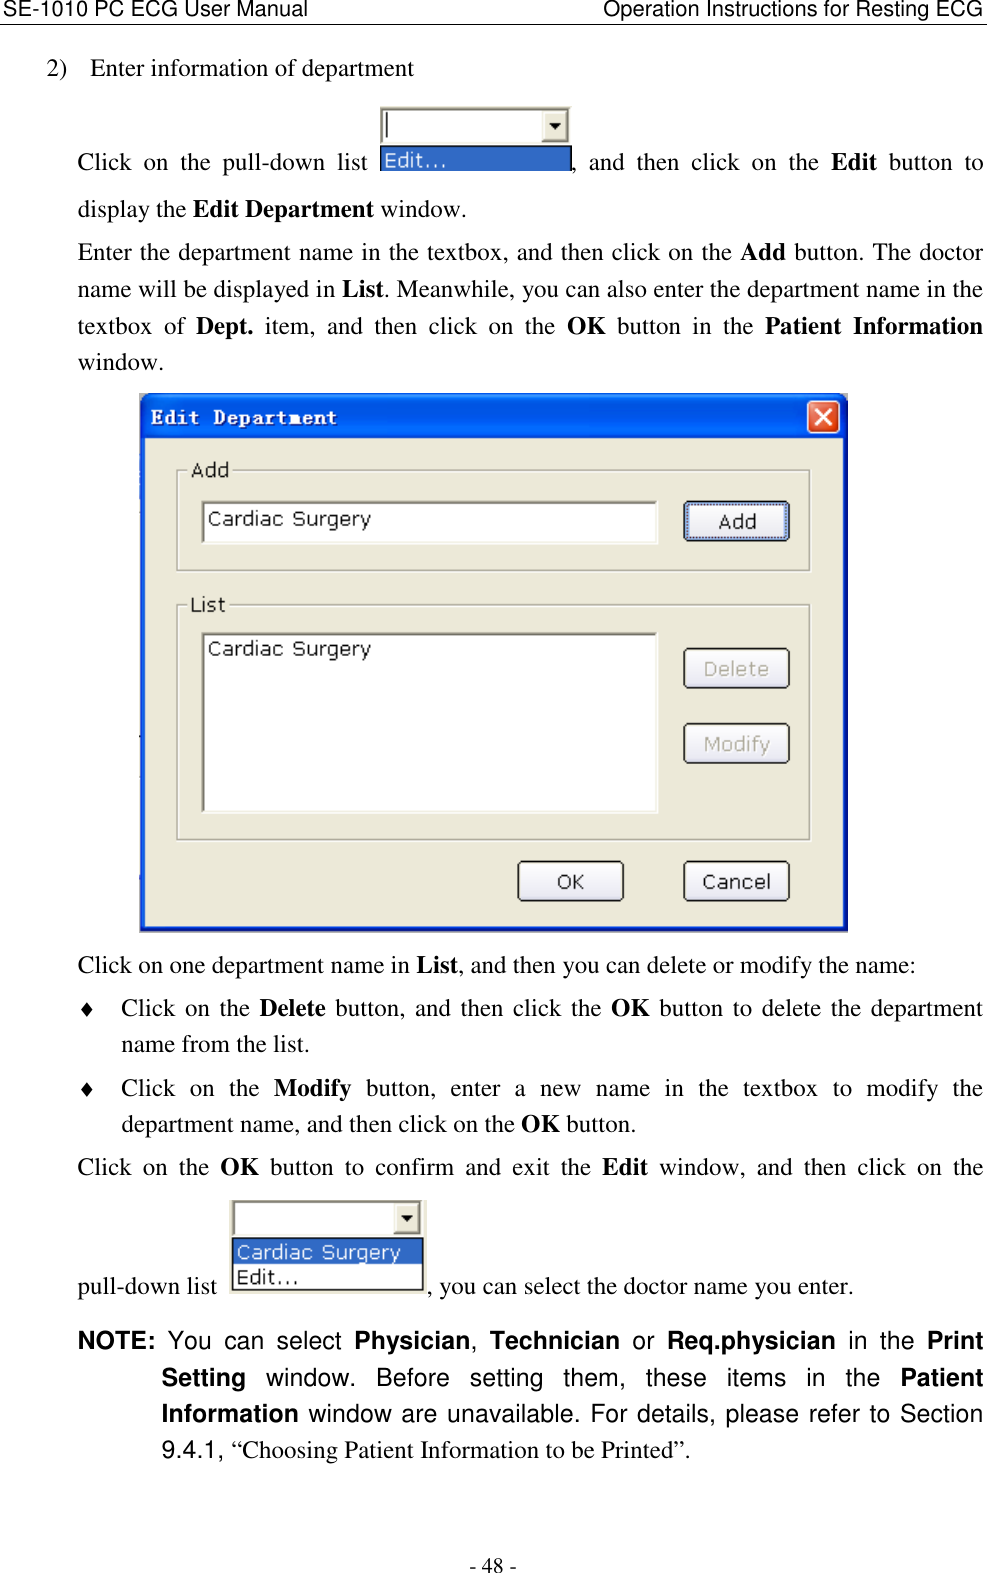 SE-1010 PC ECG User Manual                                                      Operation Instructions for Resting ECG - 48 - 2) Enter information of department Click  on  the  pull-down  list  ,  and  then  click  on  the  Edit  button  to display the Edit Department window. Enter the department name in the textbox, and then click on the Add button. The doctor name will be displayed in List. Meanwhile, you can also enter the department name in the textbox  of  Dept.  item,  and  then  click  on  the  OK  button  in  the  Patient  Information window.  Click on one department name in List, and then you can delete or modify the name: ♦ Click on the Delete button, and then click the OK button to delete the department name from the list.   ♦ Click  on  the  Modify  button,  enter  a  new  name  in  the  textbox  to  modify  the department name, and then click on the OK button. Click  on  the  OK  button  to  confirm  and  exit  the  Edit  window,  and  then  click  on  the pull-down list  , you can select the doctor name you enter.   NOTE:  You  can  select  Physician,  Technician  or  Req.physician  in  the  Print Setting  window.  Before  setting  them,  these  items  in  the  Patient Information window are unavailable. For details, please refer to Section 9.4.1, “Choosing Patient Information to be Printed”. 